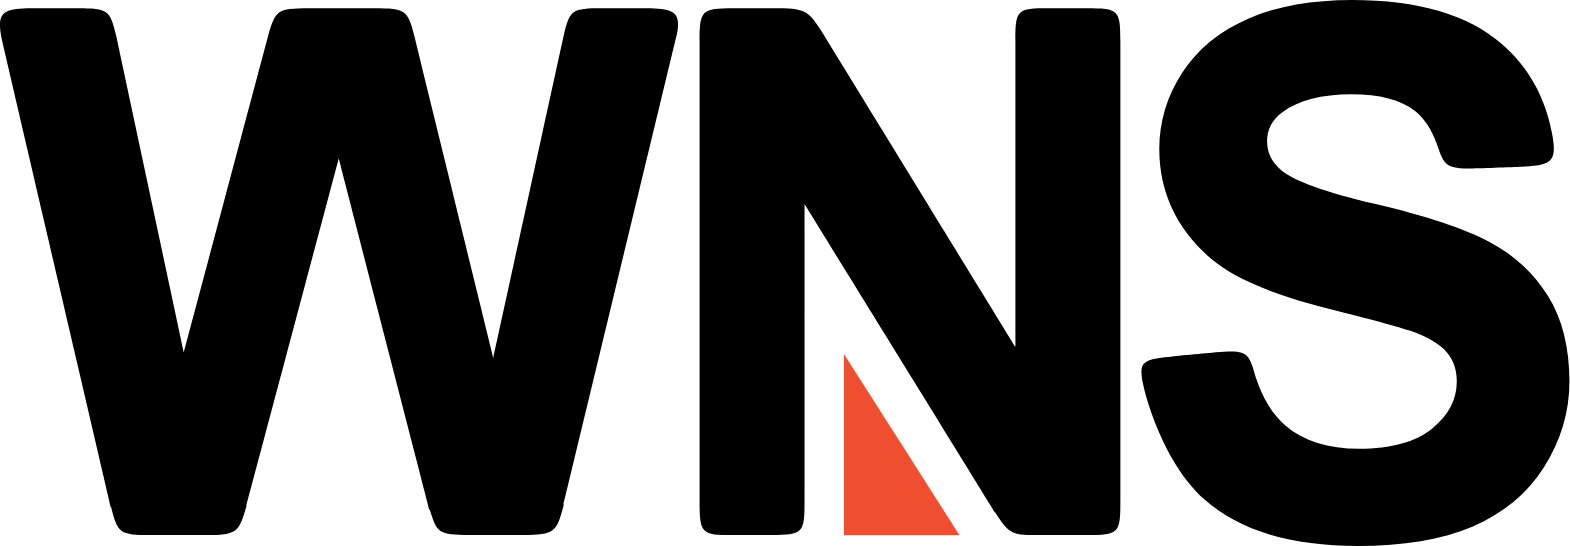 WNS logo in transparent PNG and vectorized SVG formats